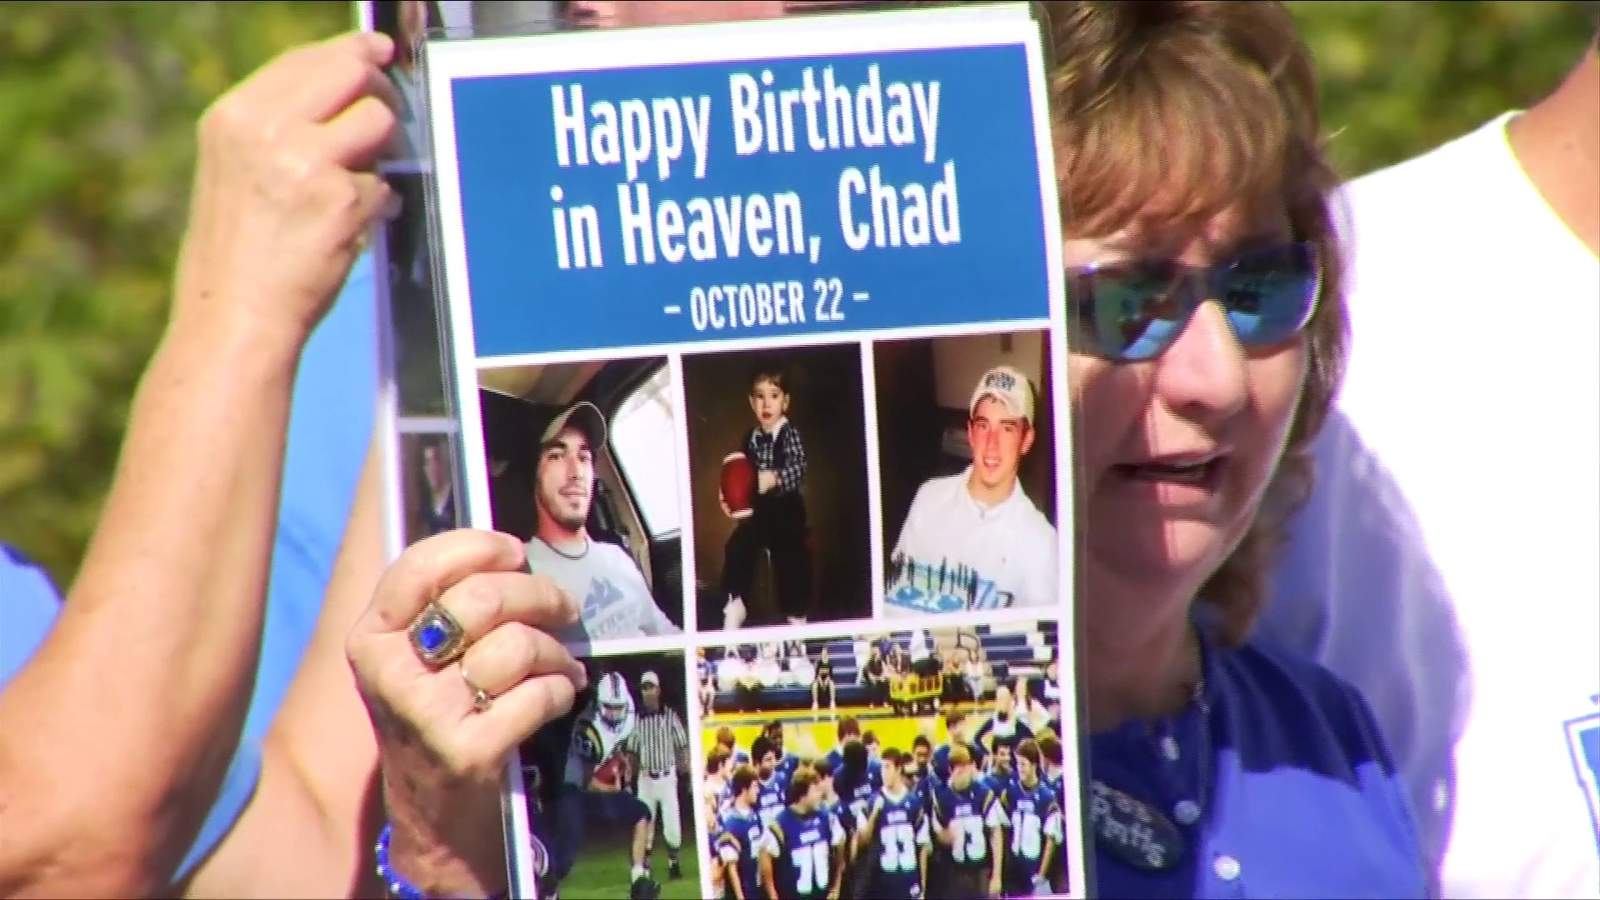 'We don’t want Chad forgotten’: Police, family ask for answers in Buena Vista man’s death